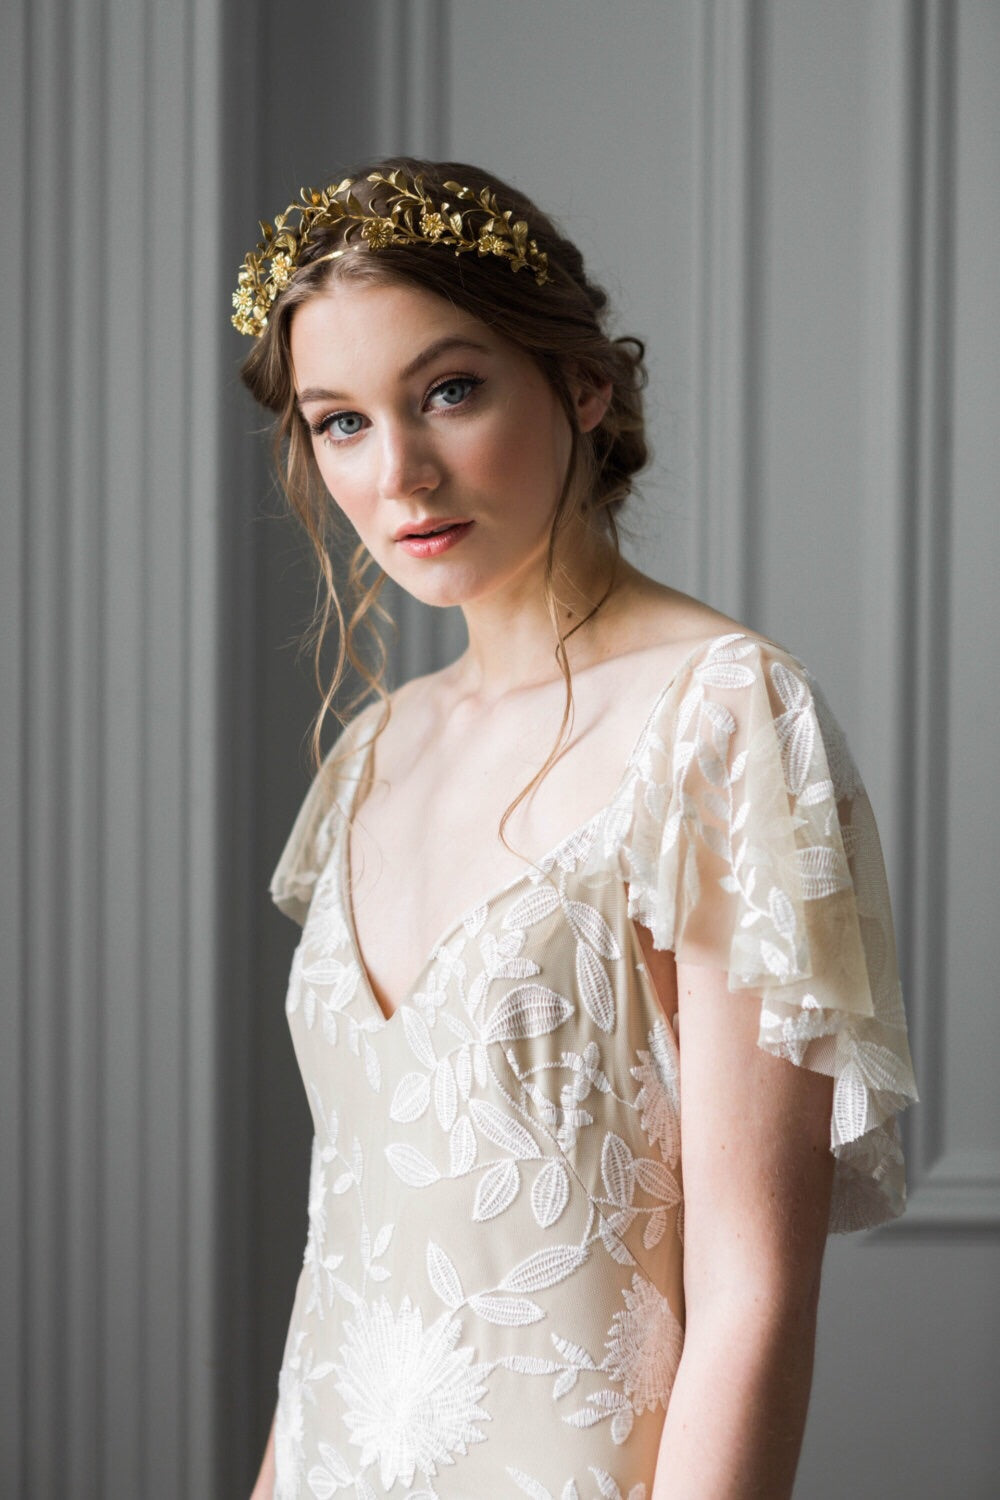 Bride wearing a gold headpiece made of replica anitque myrtle leaves